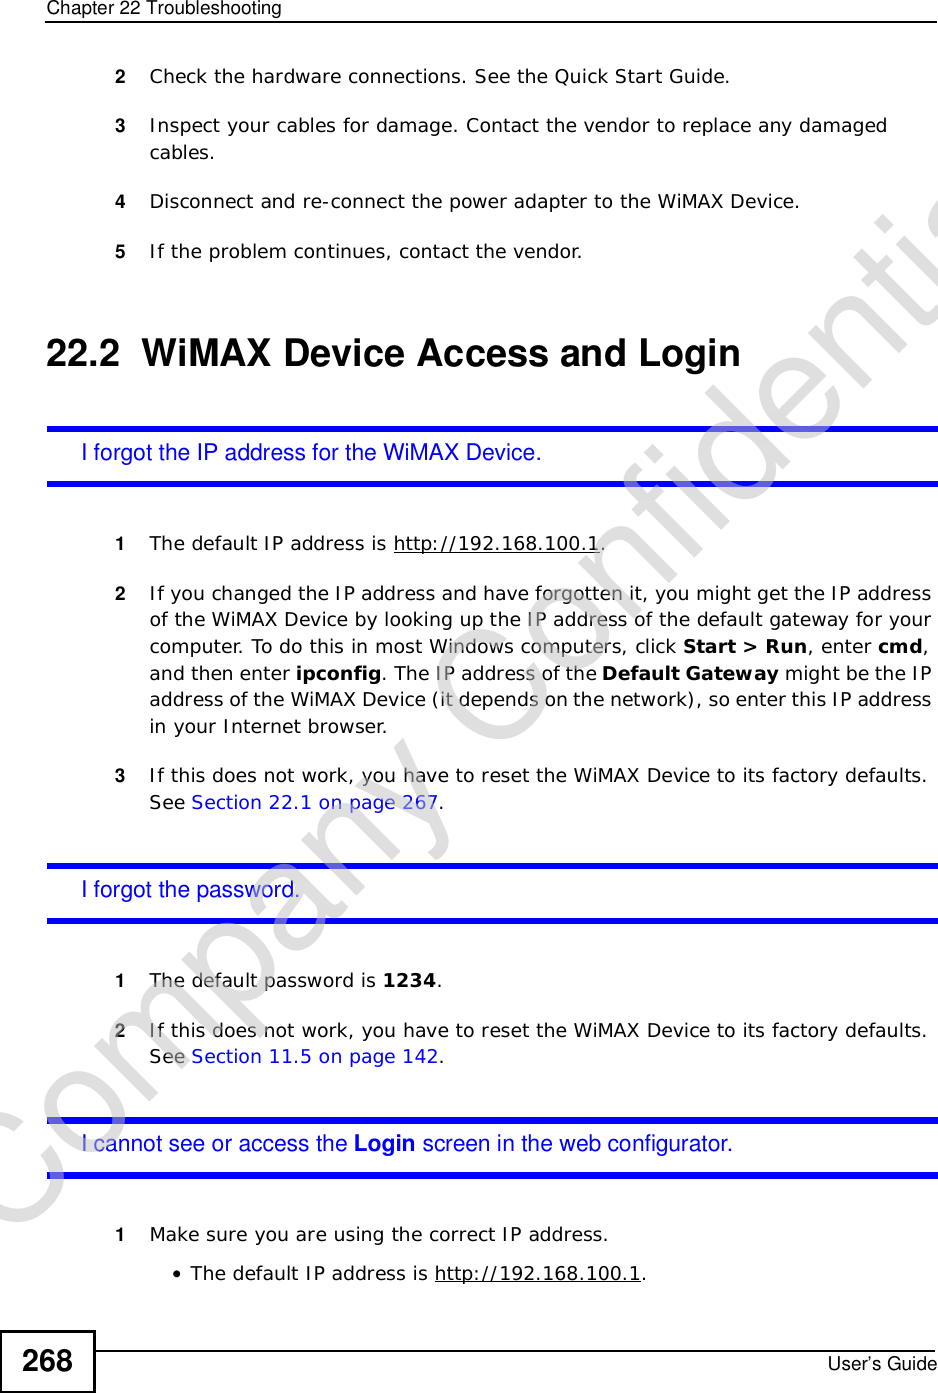 Chapter 22TroubleshootingUser’s Guide2682Check the hardware connections. See the Quick Start Guide.3Inspect your cables for damage. Contact the vendor to replace any damaged cables.4Disconnect and re-connect the power adapter to the WiMAX Device.5If the problem continues, contact the vendor.22.2  WiMAX Device Access and LoginI forgot the IP address for the WiMAX Device.1The default IP address is http://192.168.100.1.2If you changed the IP address and have forgotten it, you might get the IP address of the WiMAX Device by looking up the IP address of the default gateway for your computer. To do this in most Windows computers, click Start &gt; Run, enter cmd,and then enter ipconfig. The IP address of the Default Gateway might be the IP address of the WiMAX Device (it depends on the network), so enter this IP address in your Internet browser.3If this does not work, you have to reset the WiMAX Device to its factory defaults. See Section 22.1 on page 267.I forgot the password.1The default password is 1234.2If this does not work, you have to reset the WiMAX Device to its factory defaults. See Section 11.5 on page 142.I cannot see or access the Login screen in the web configurator.1Make sure you are using the correct IP address.•The default IP address is http://192.168.100.1.Company Confidential